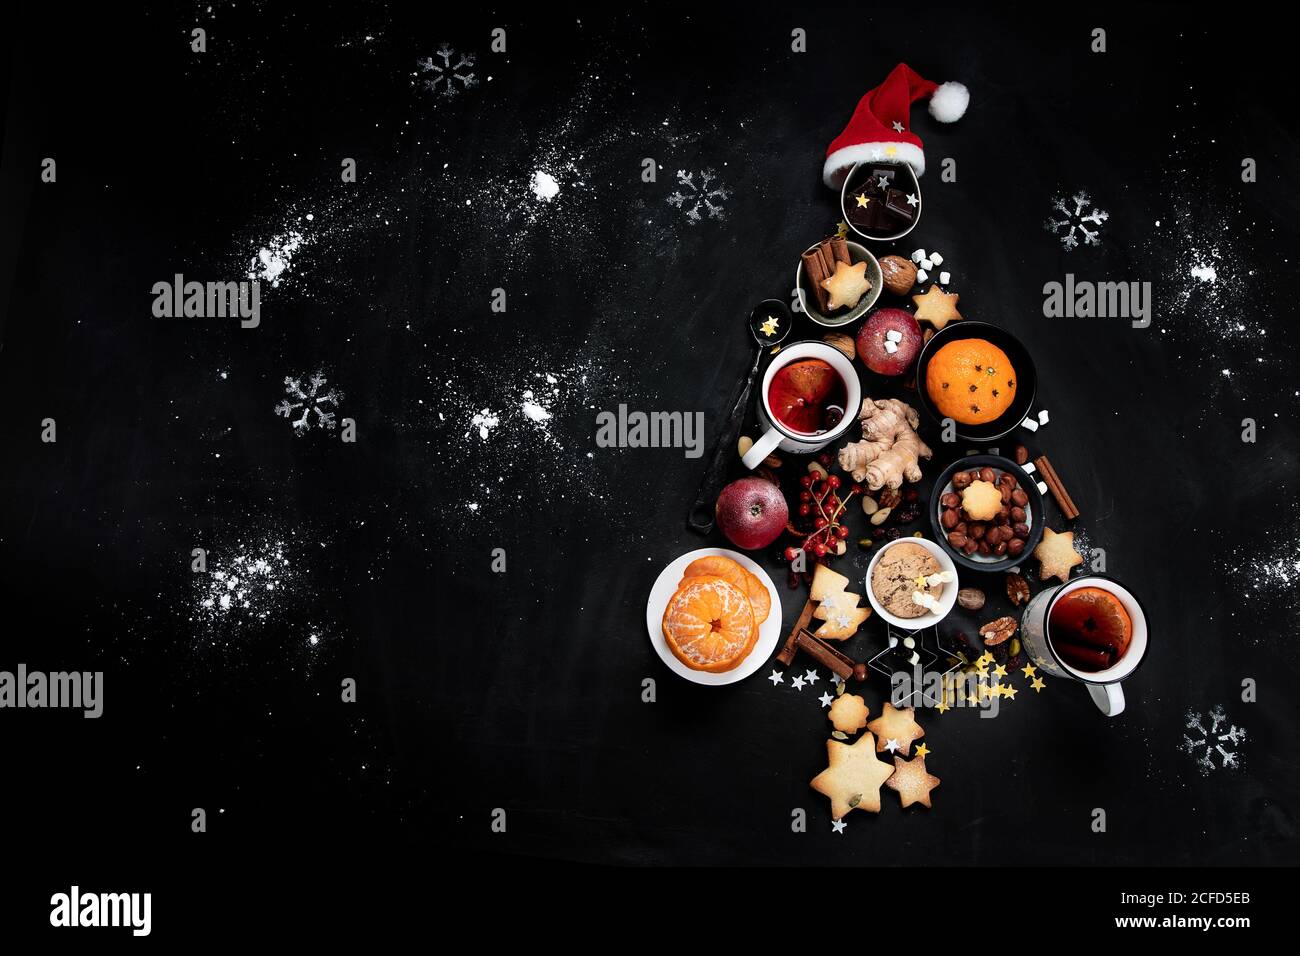 Christmas Tree made of holiday food on black background. Top view, flat lay  with copy space. Christmas concept. New Year Holidays background. Stock Photo